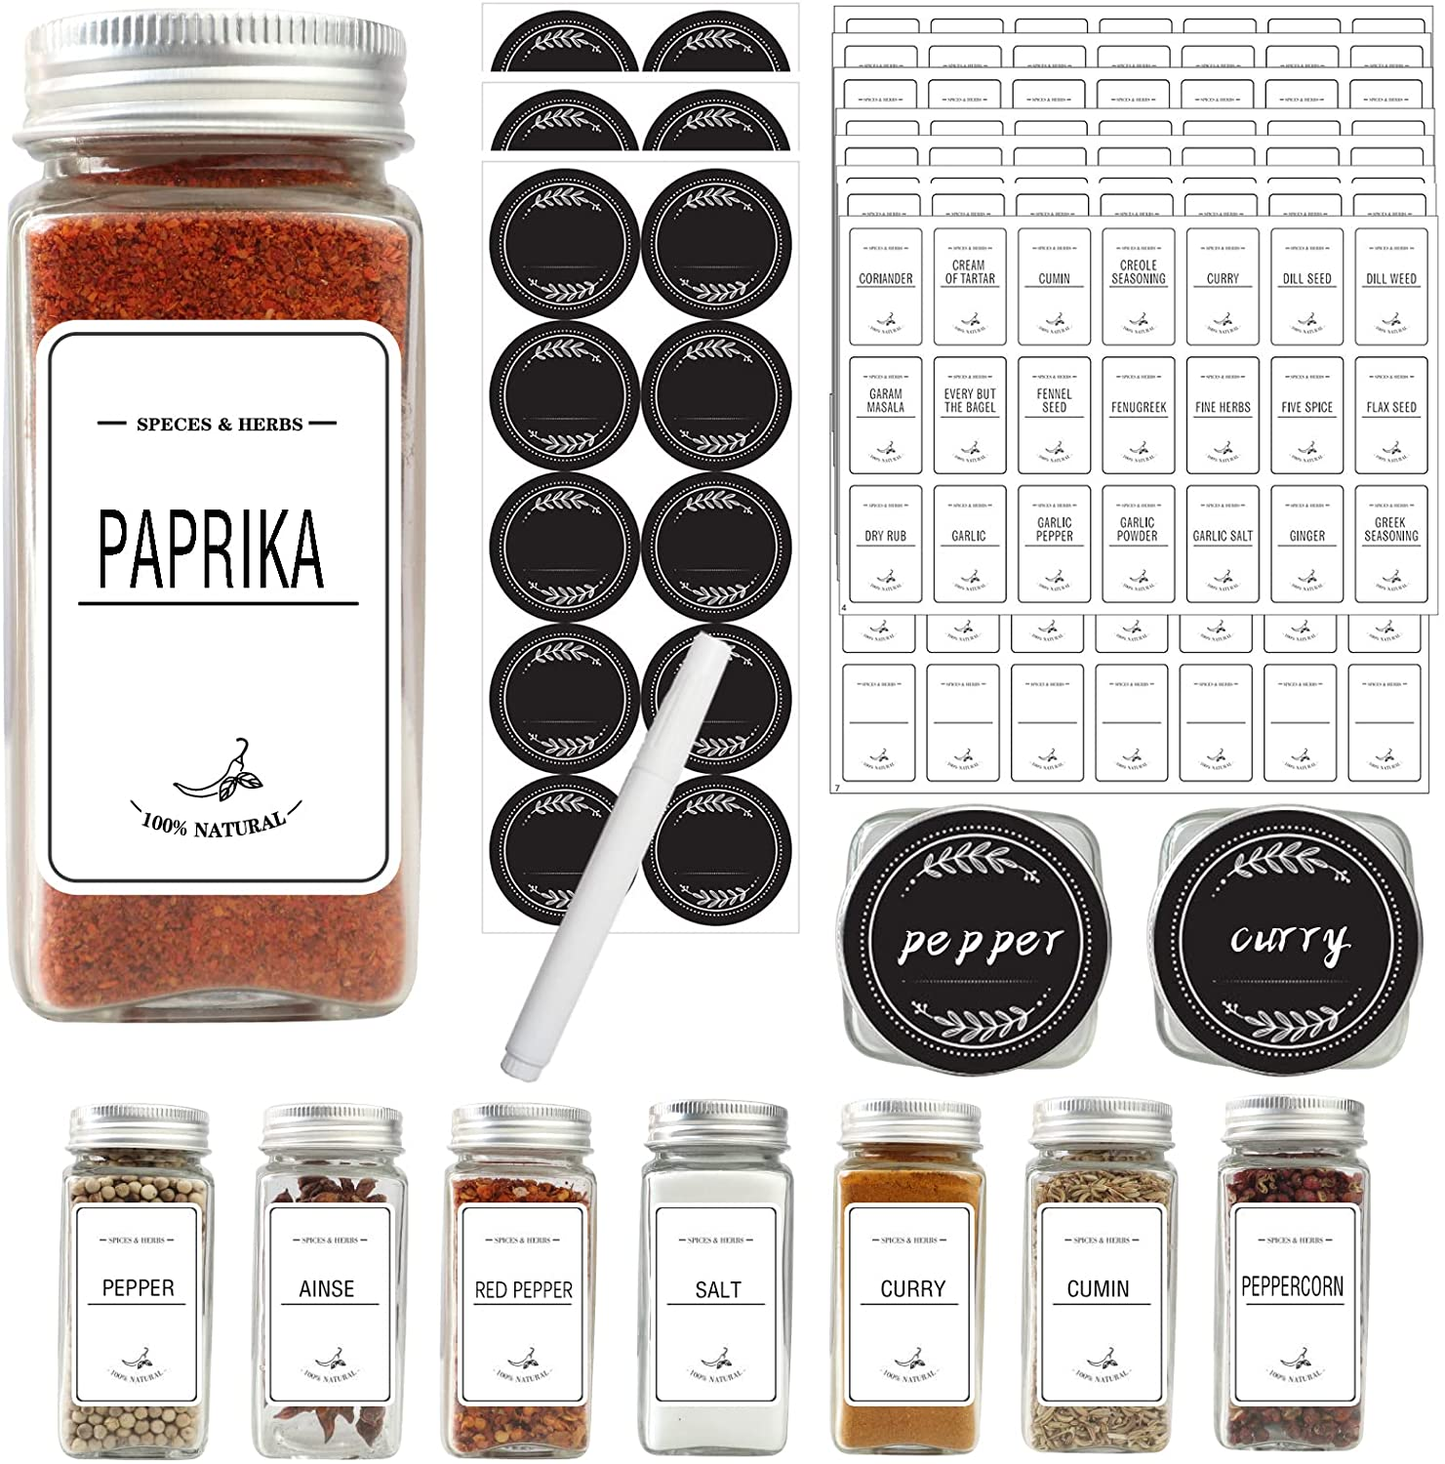 Spice Jar Labels - 198 Preprinted Spice Stickers with Marker. Water Resistant, Farmhouse Pantry Labels ​Great for Herb &Spice Organization Spice Rack